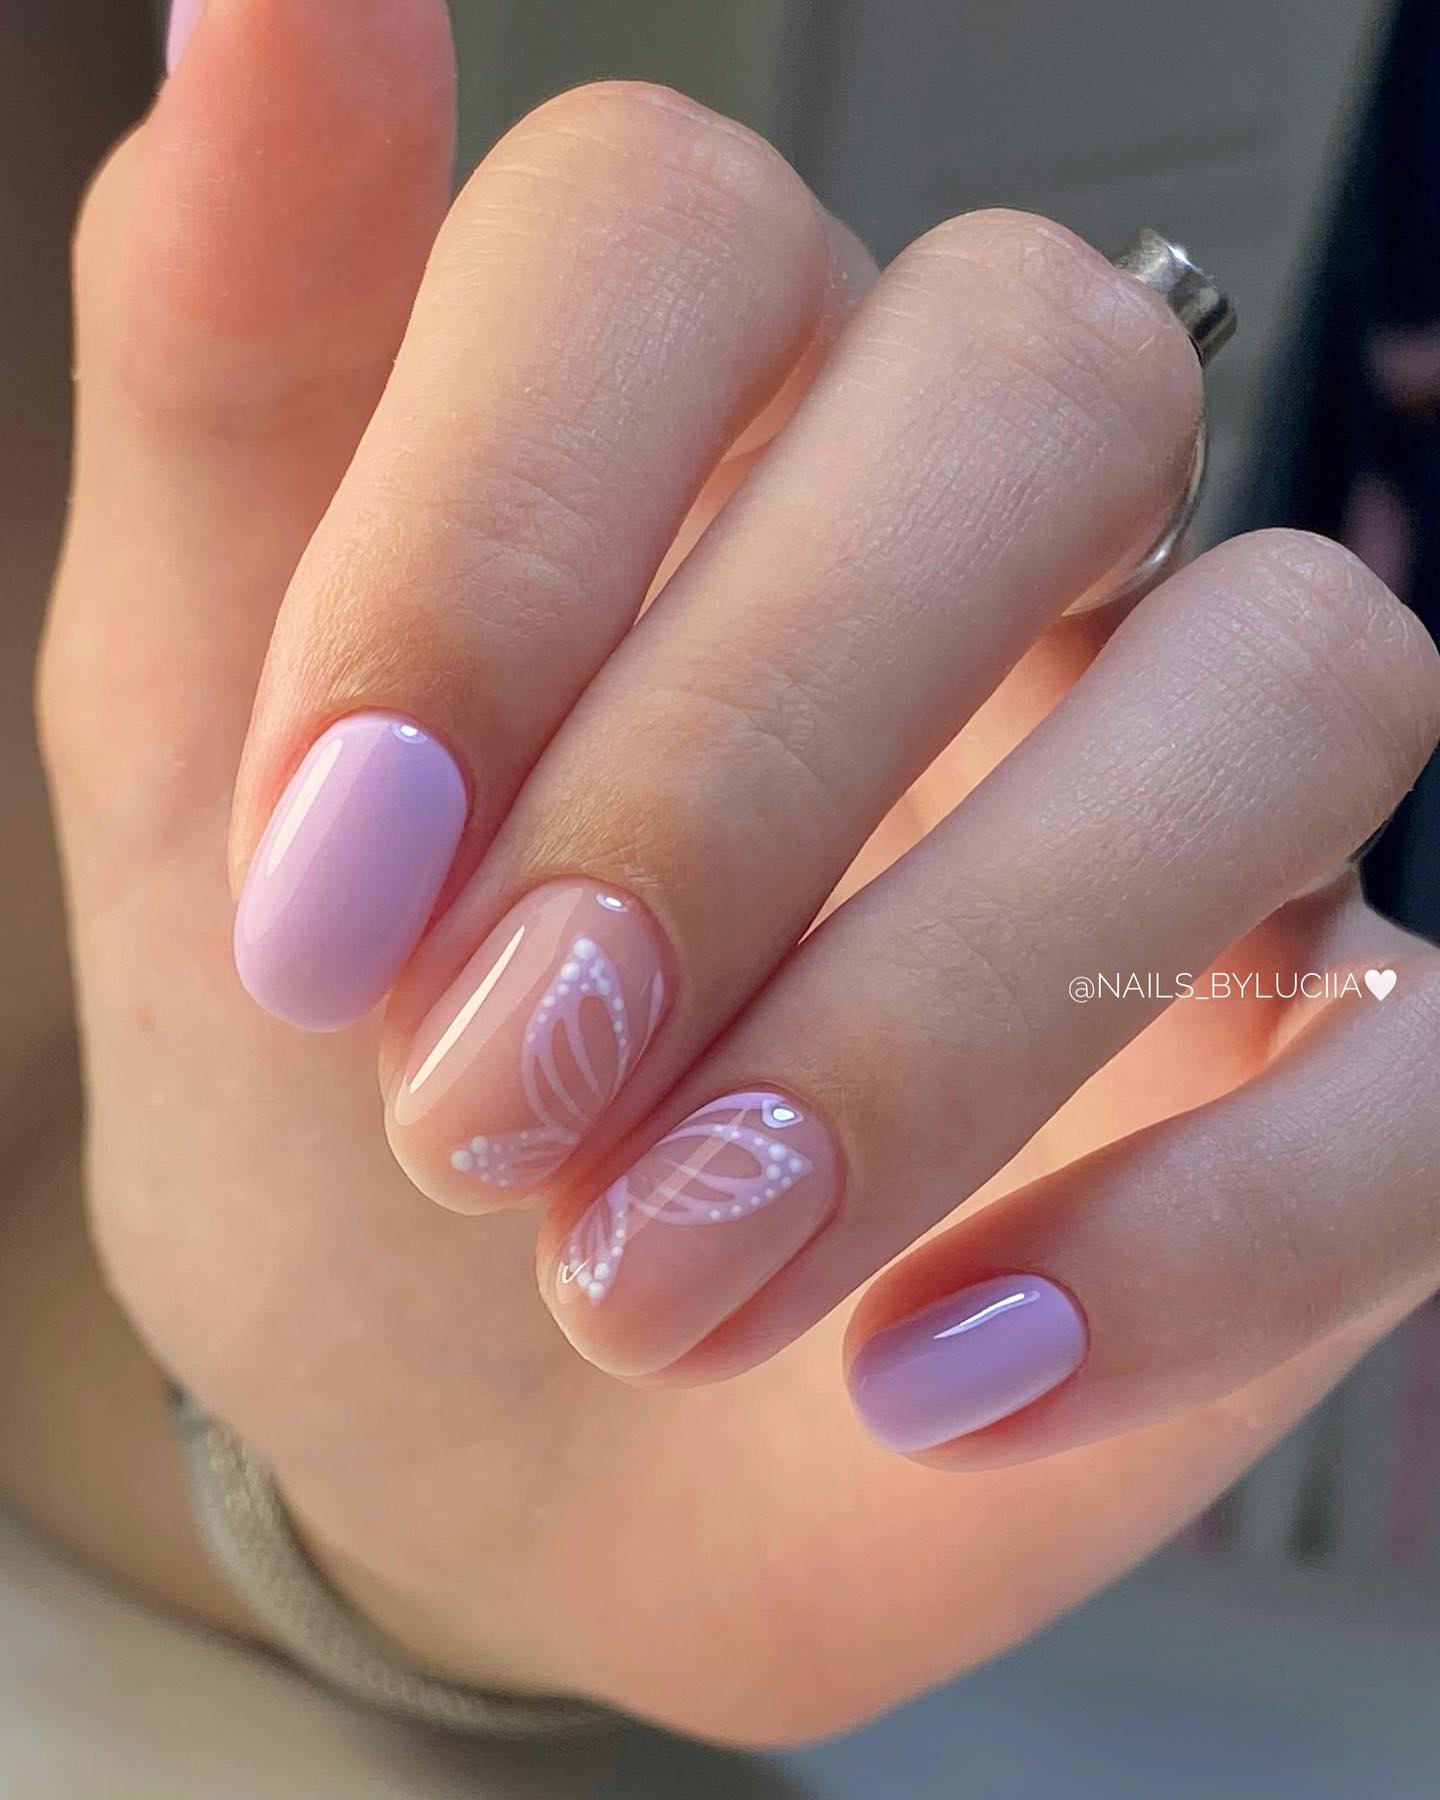 100+ Short Nail Designs You’ll Want To Try This Year images 82